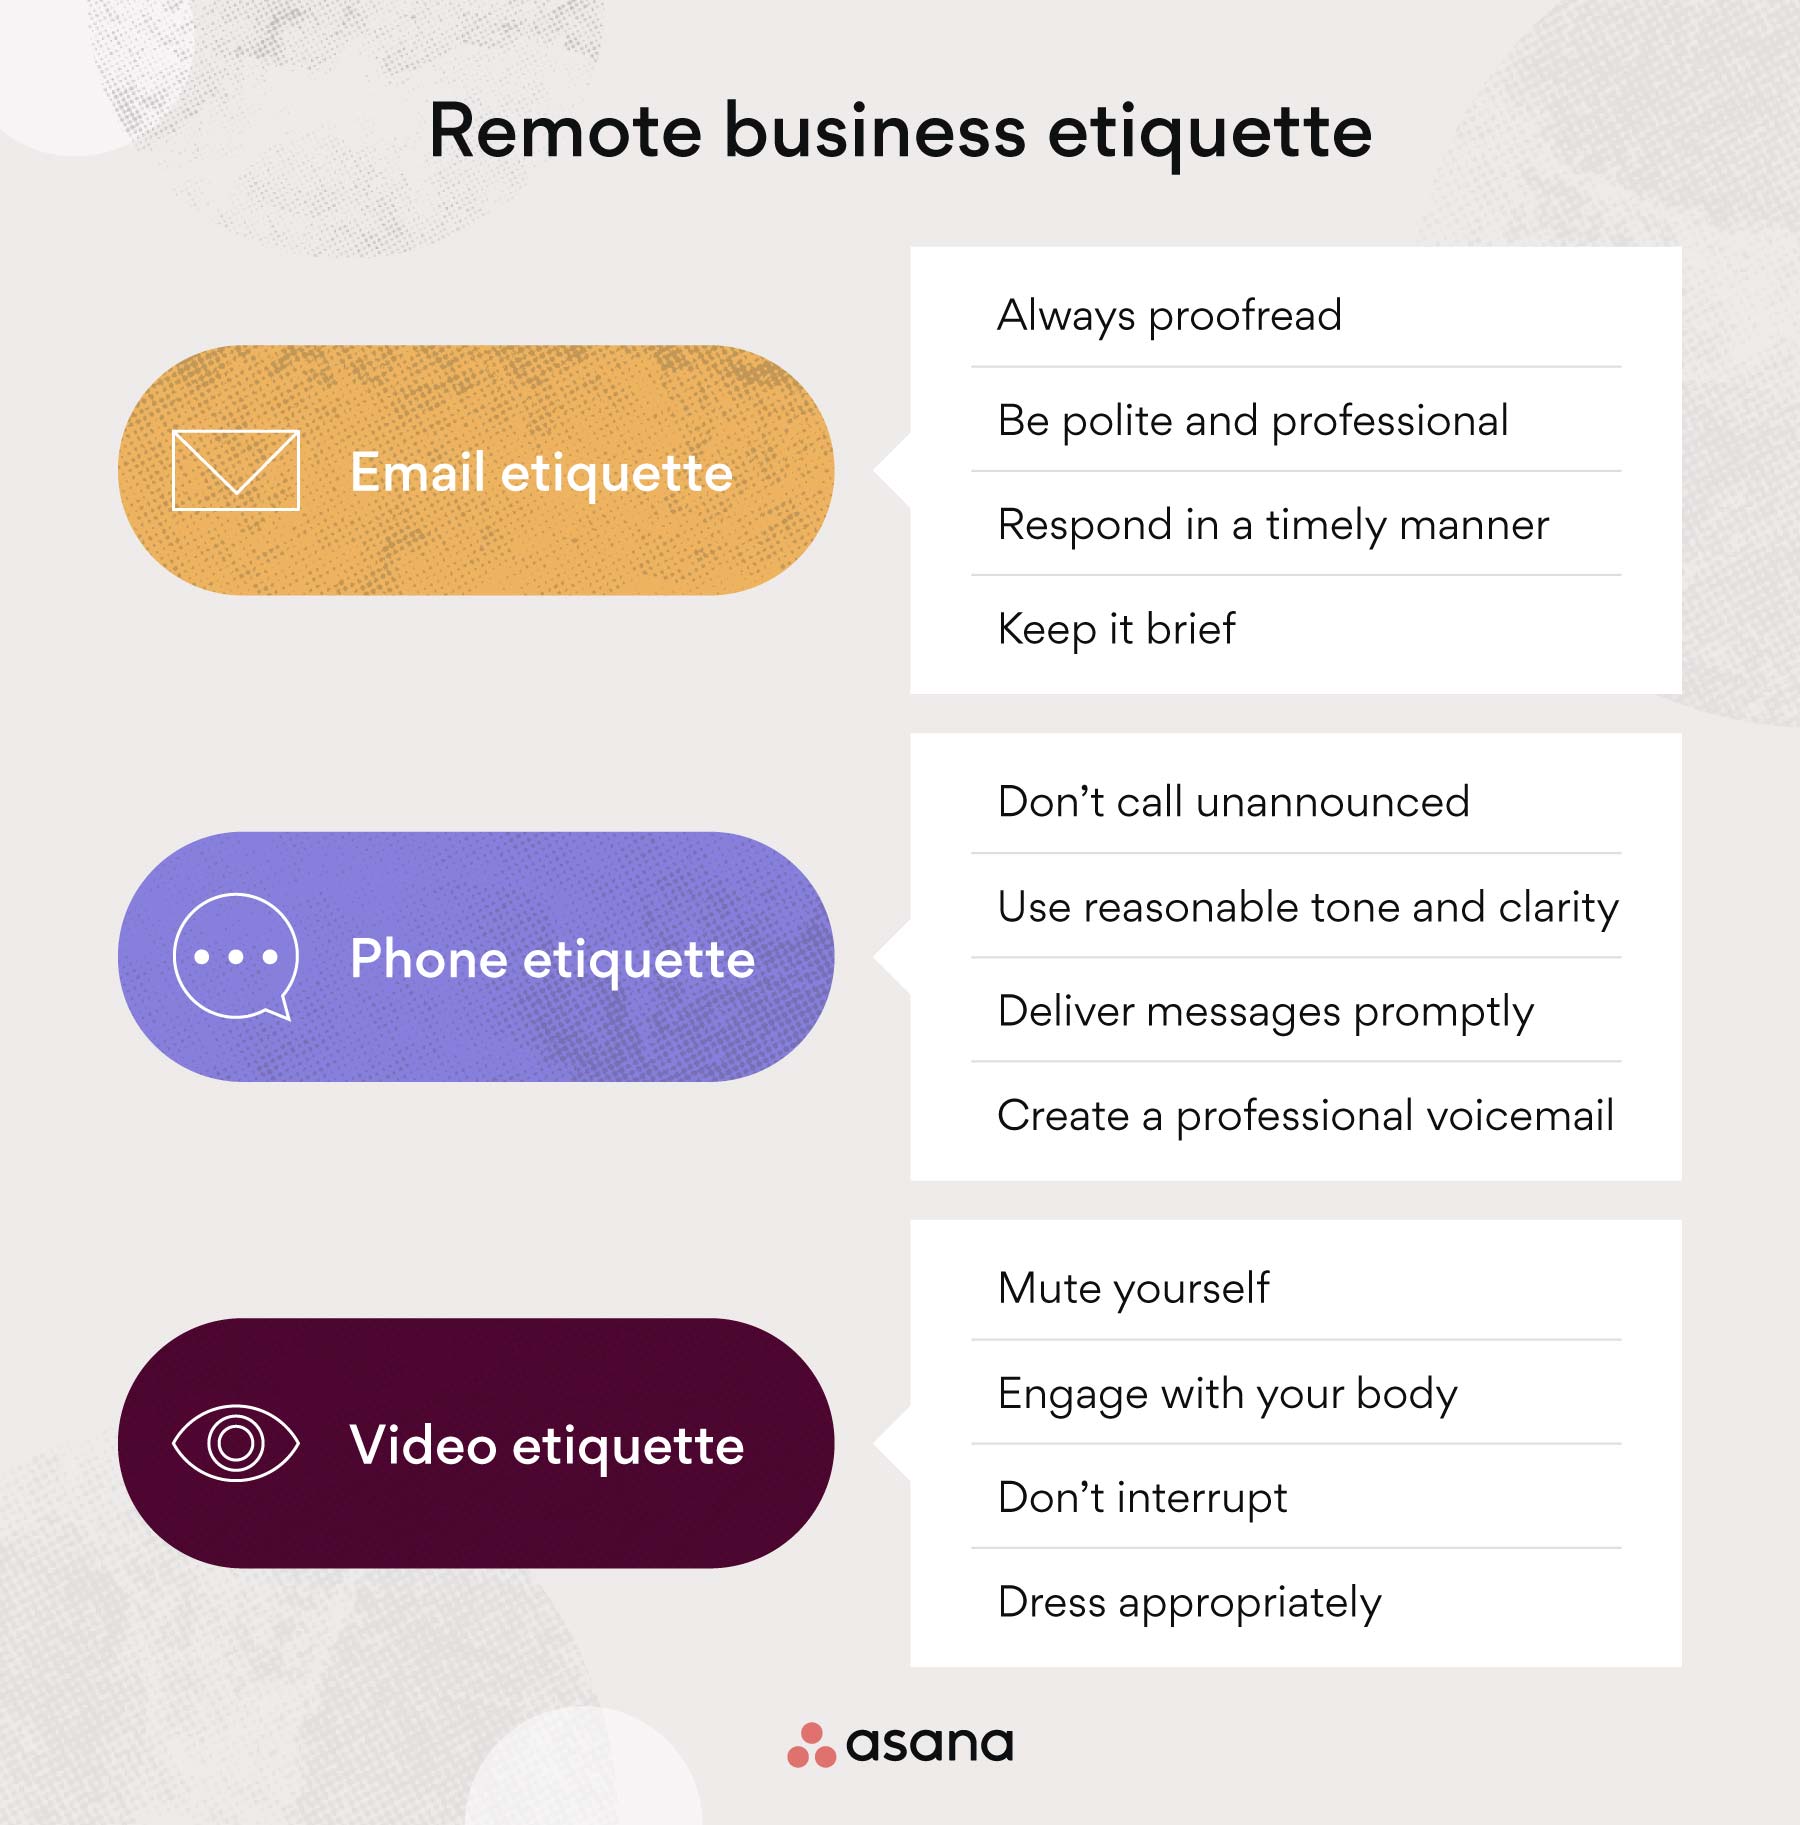 Business etiquette for remote workers